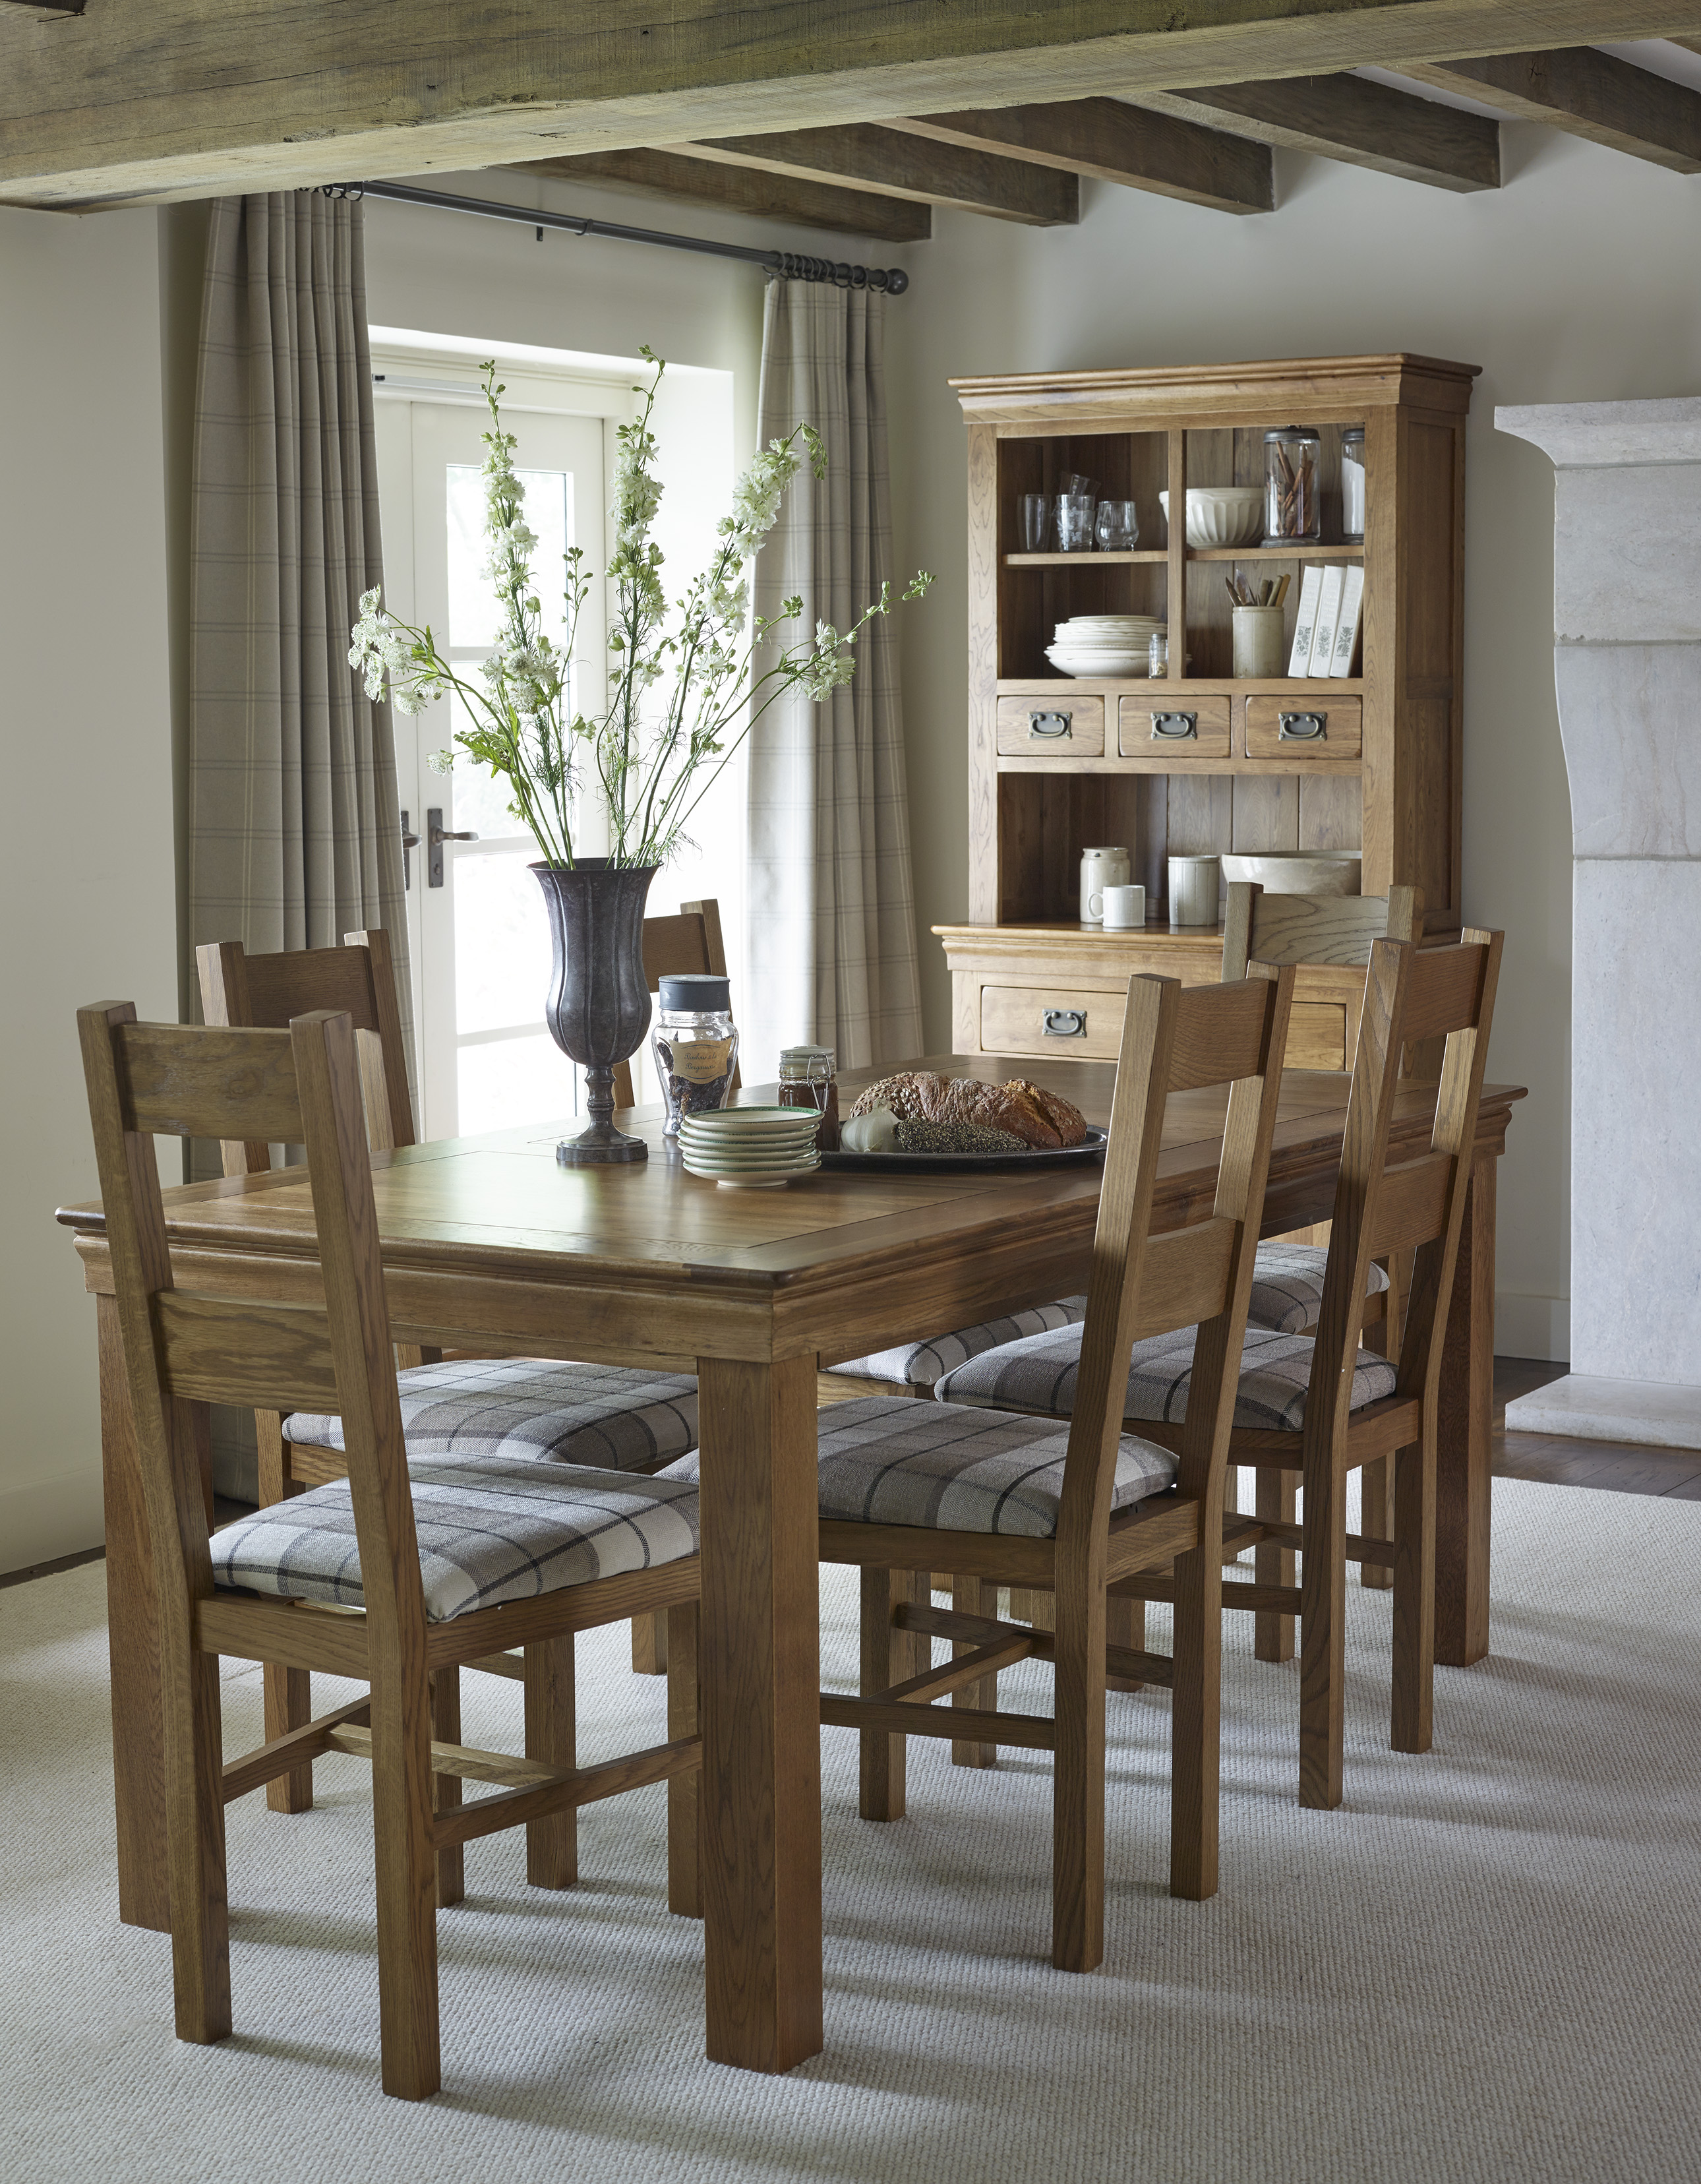 rustic farmhouse style dining furniture in dining room